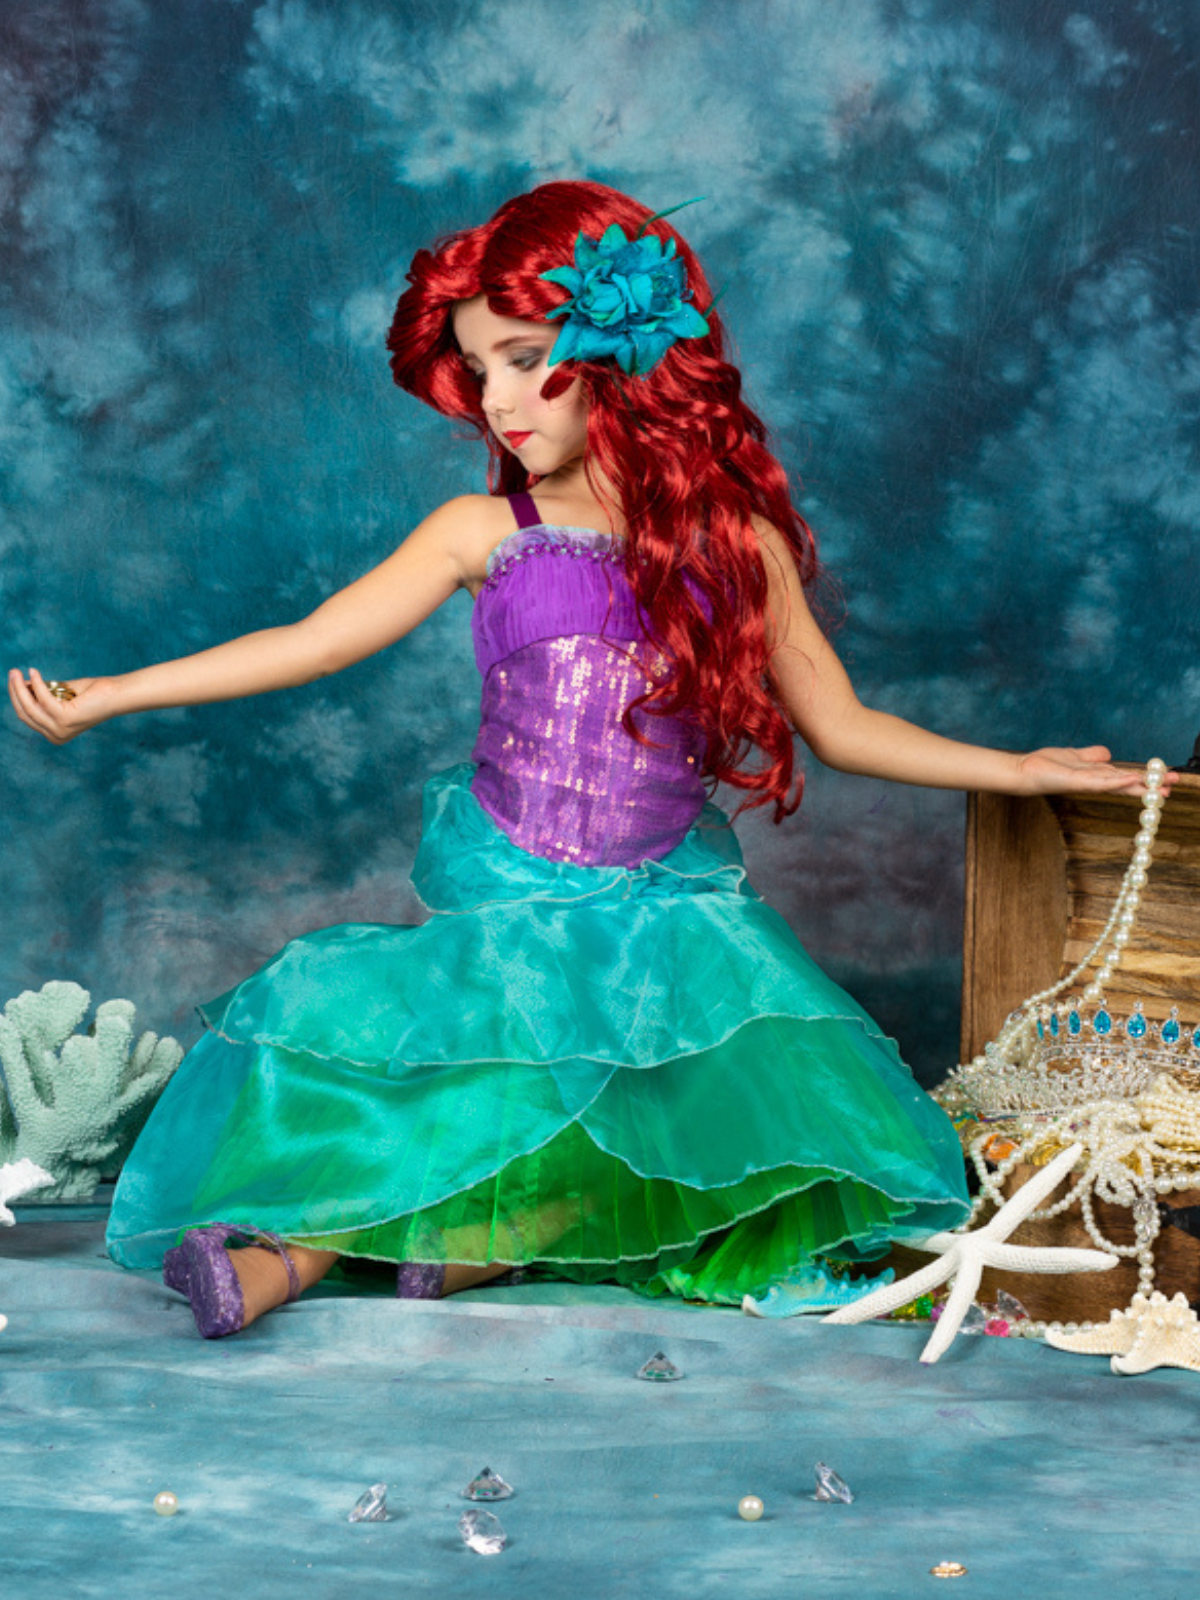 Ariel the little mermaid - pink ball gown | Ariel cosplay, Pink ball gown, Disney  dresses